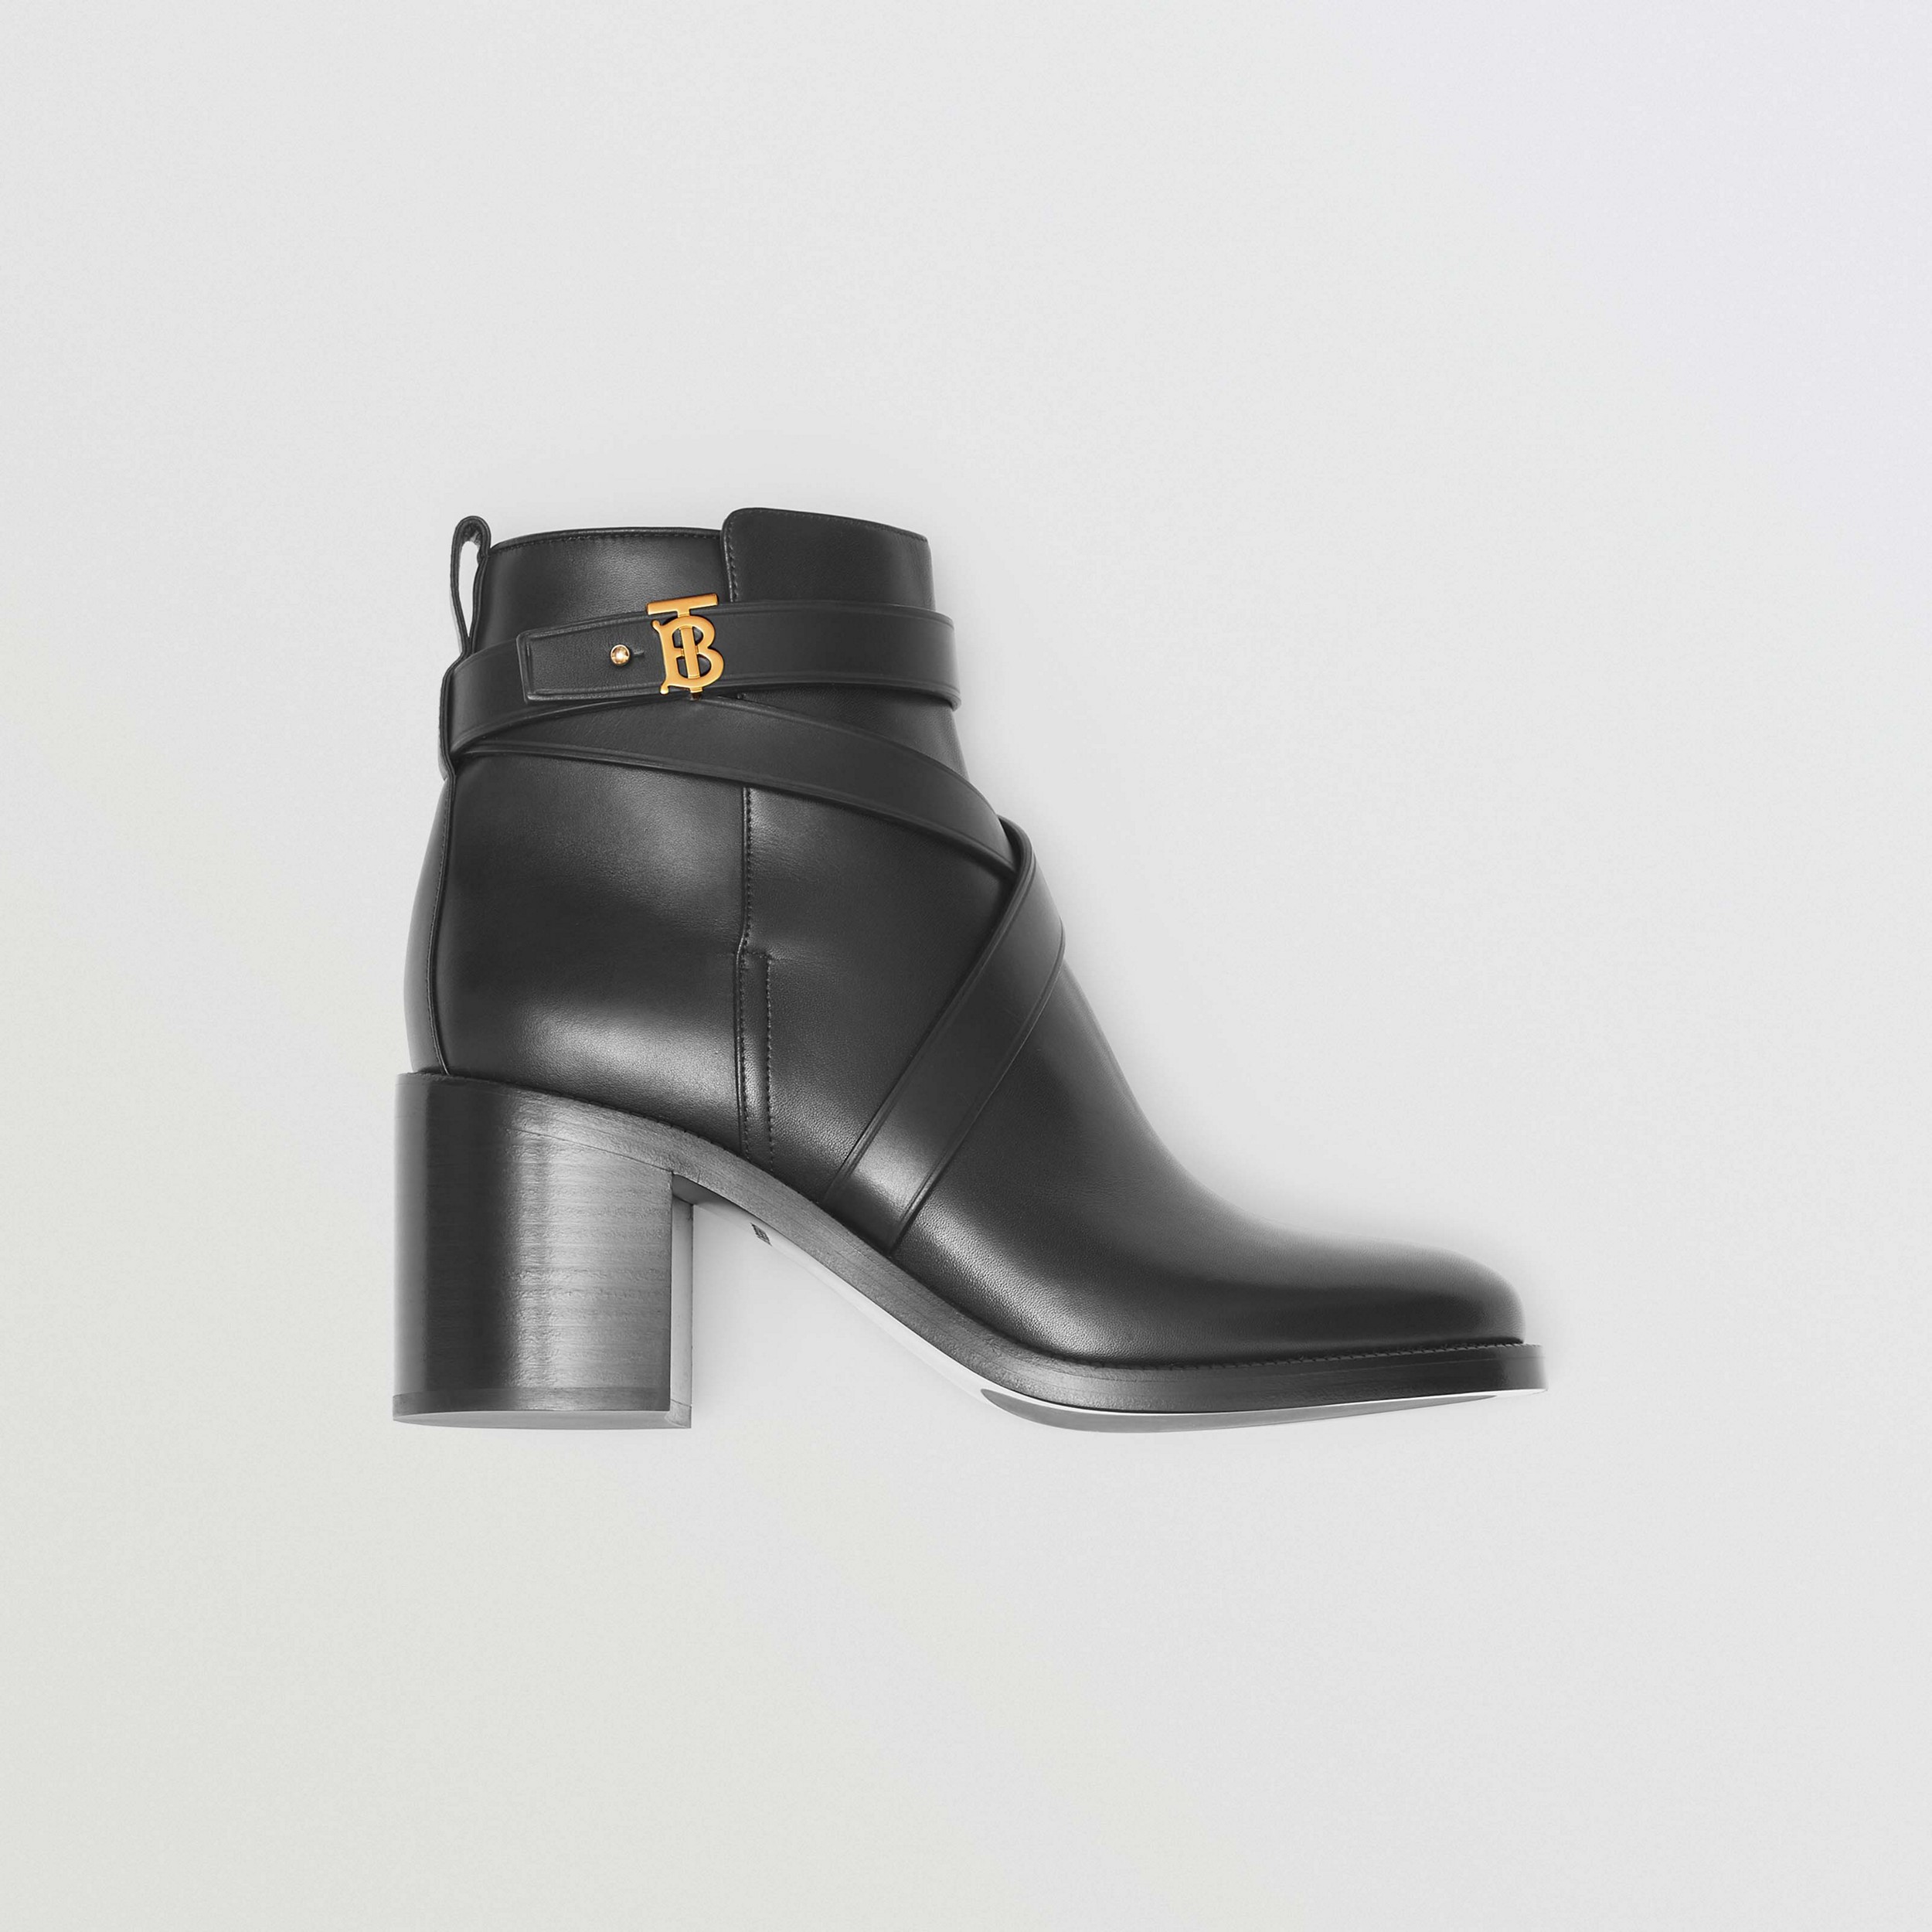 Monogram Motif Leather Ankle Boots in Black - Women | Burberry United ...